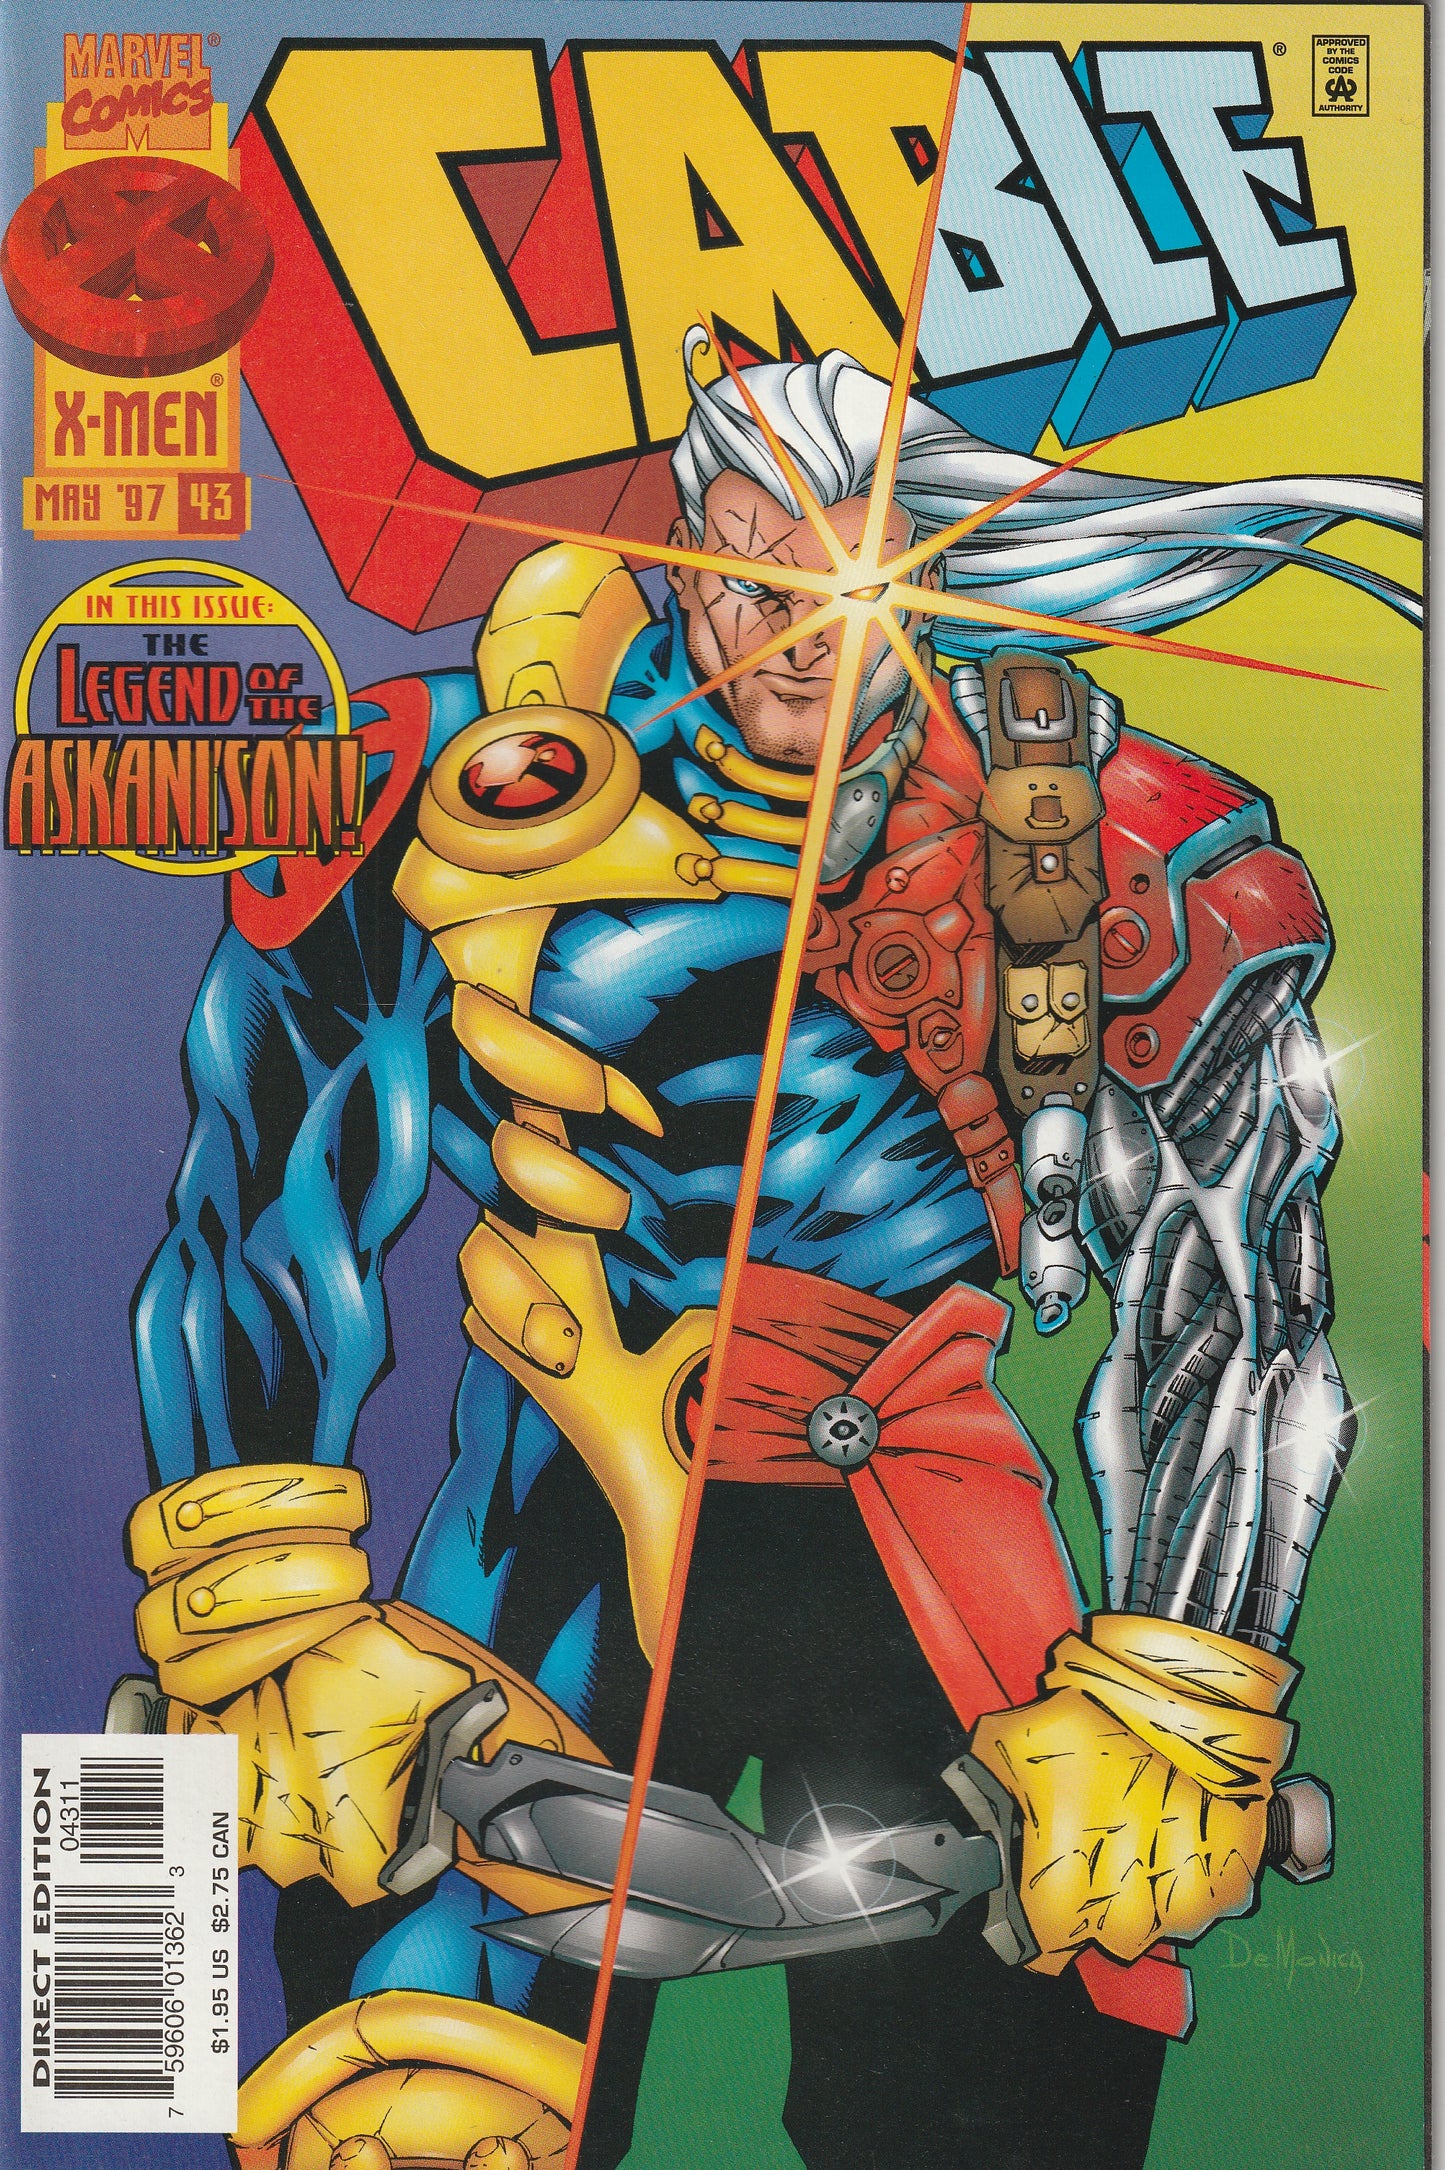 Cable #43 (1997)